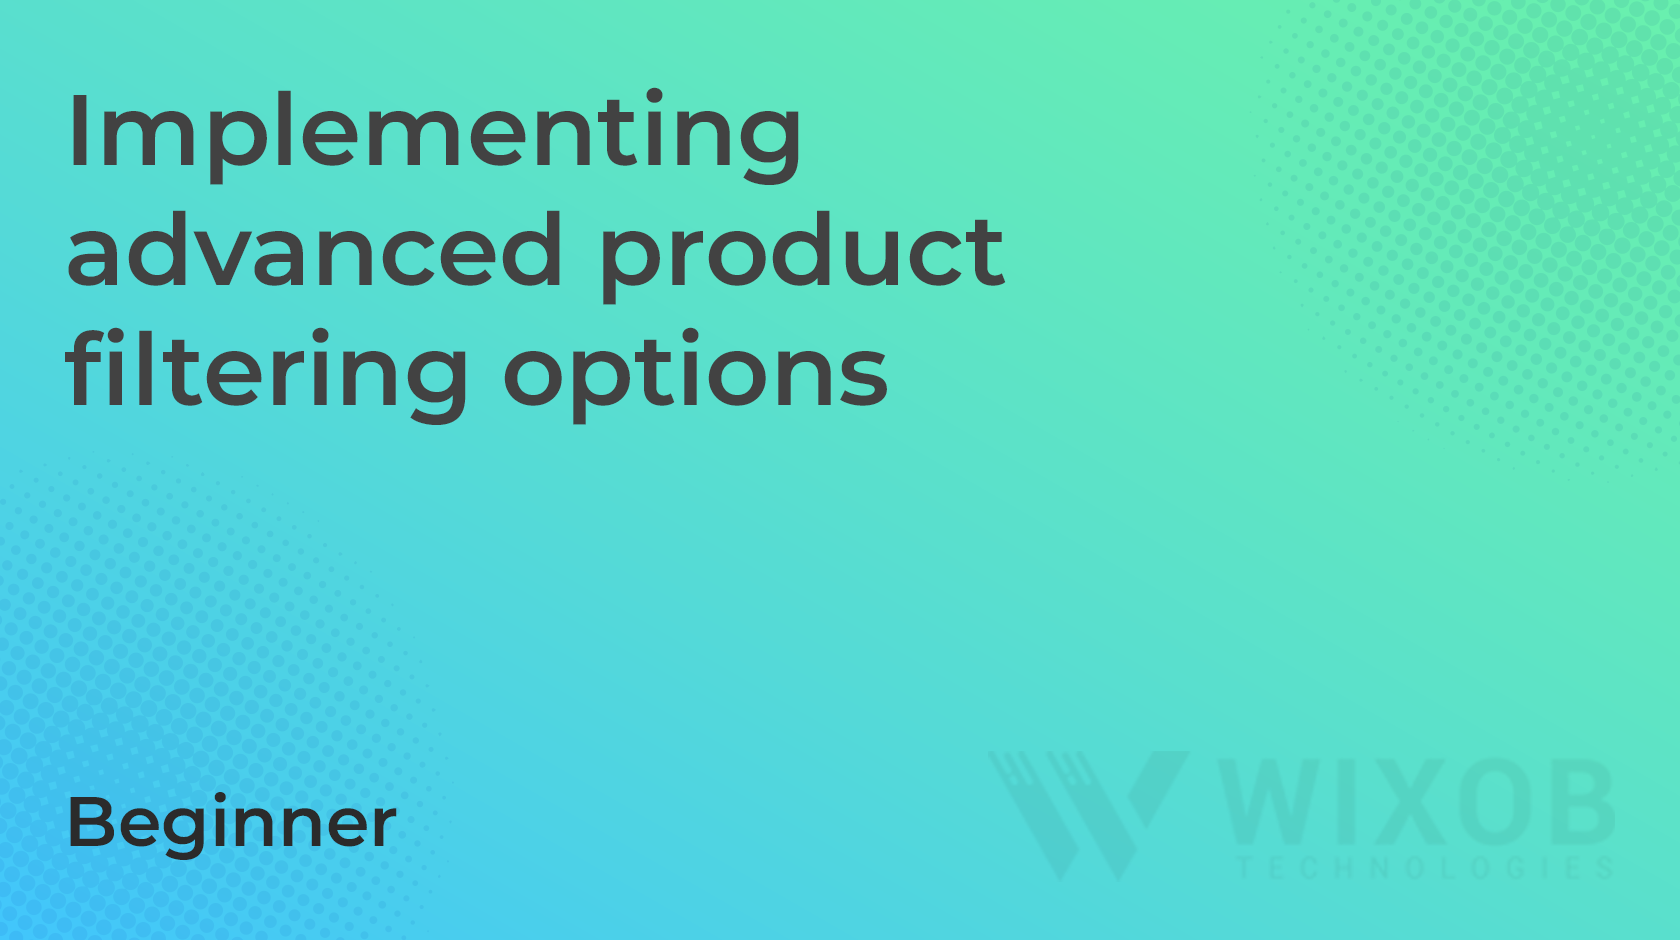 Implementing advanced product filtering options